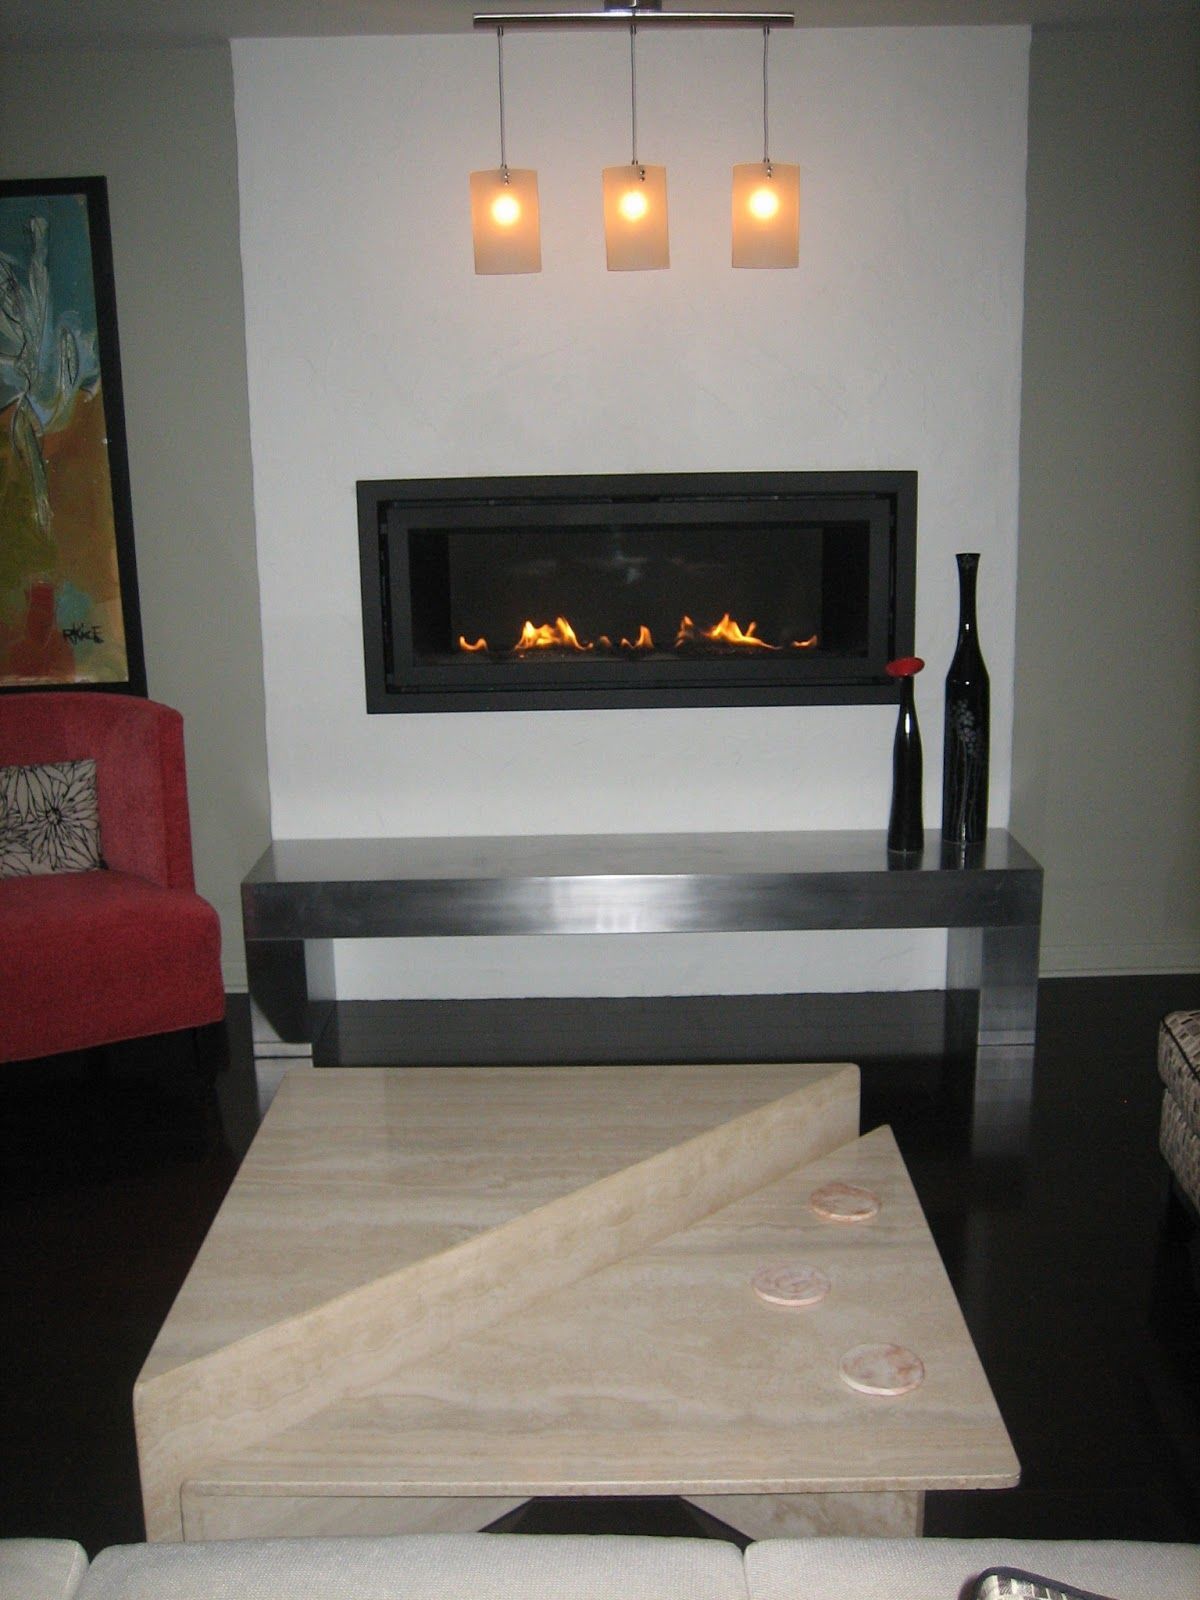 Lighting Above Fireplace Lovely Pin by Ebooklover On Fireplace